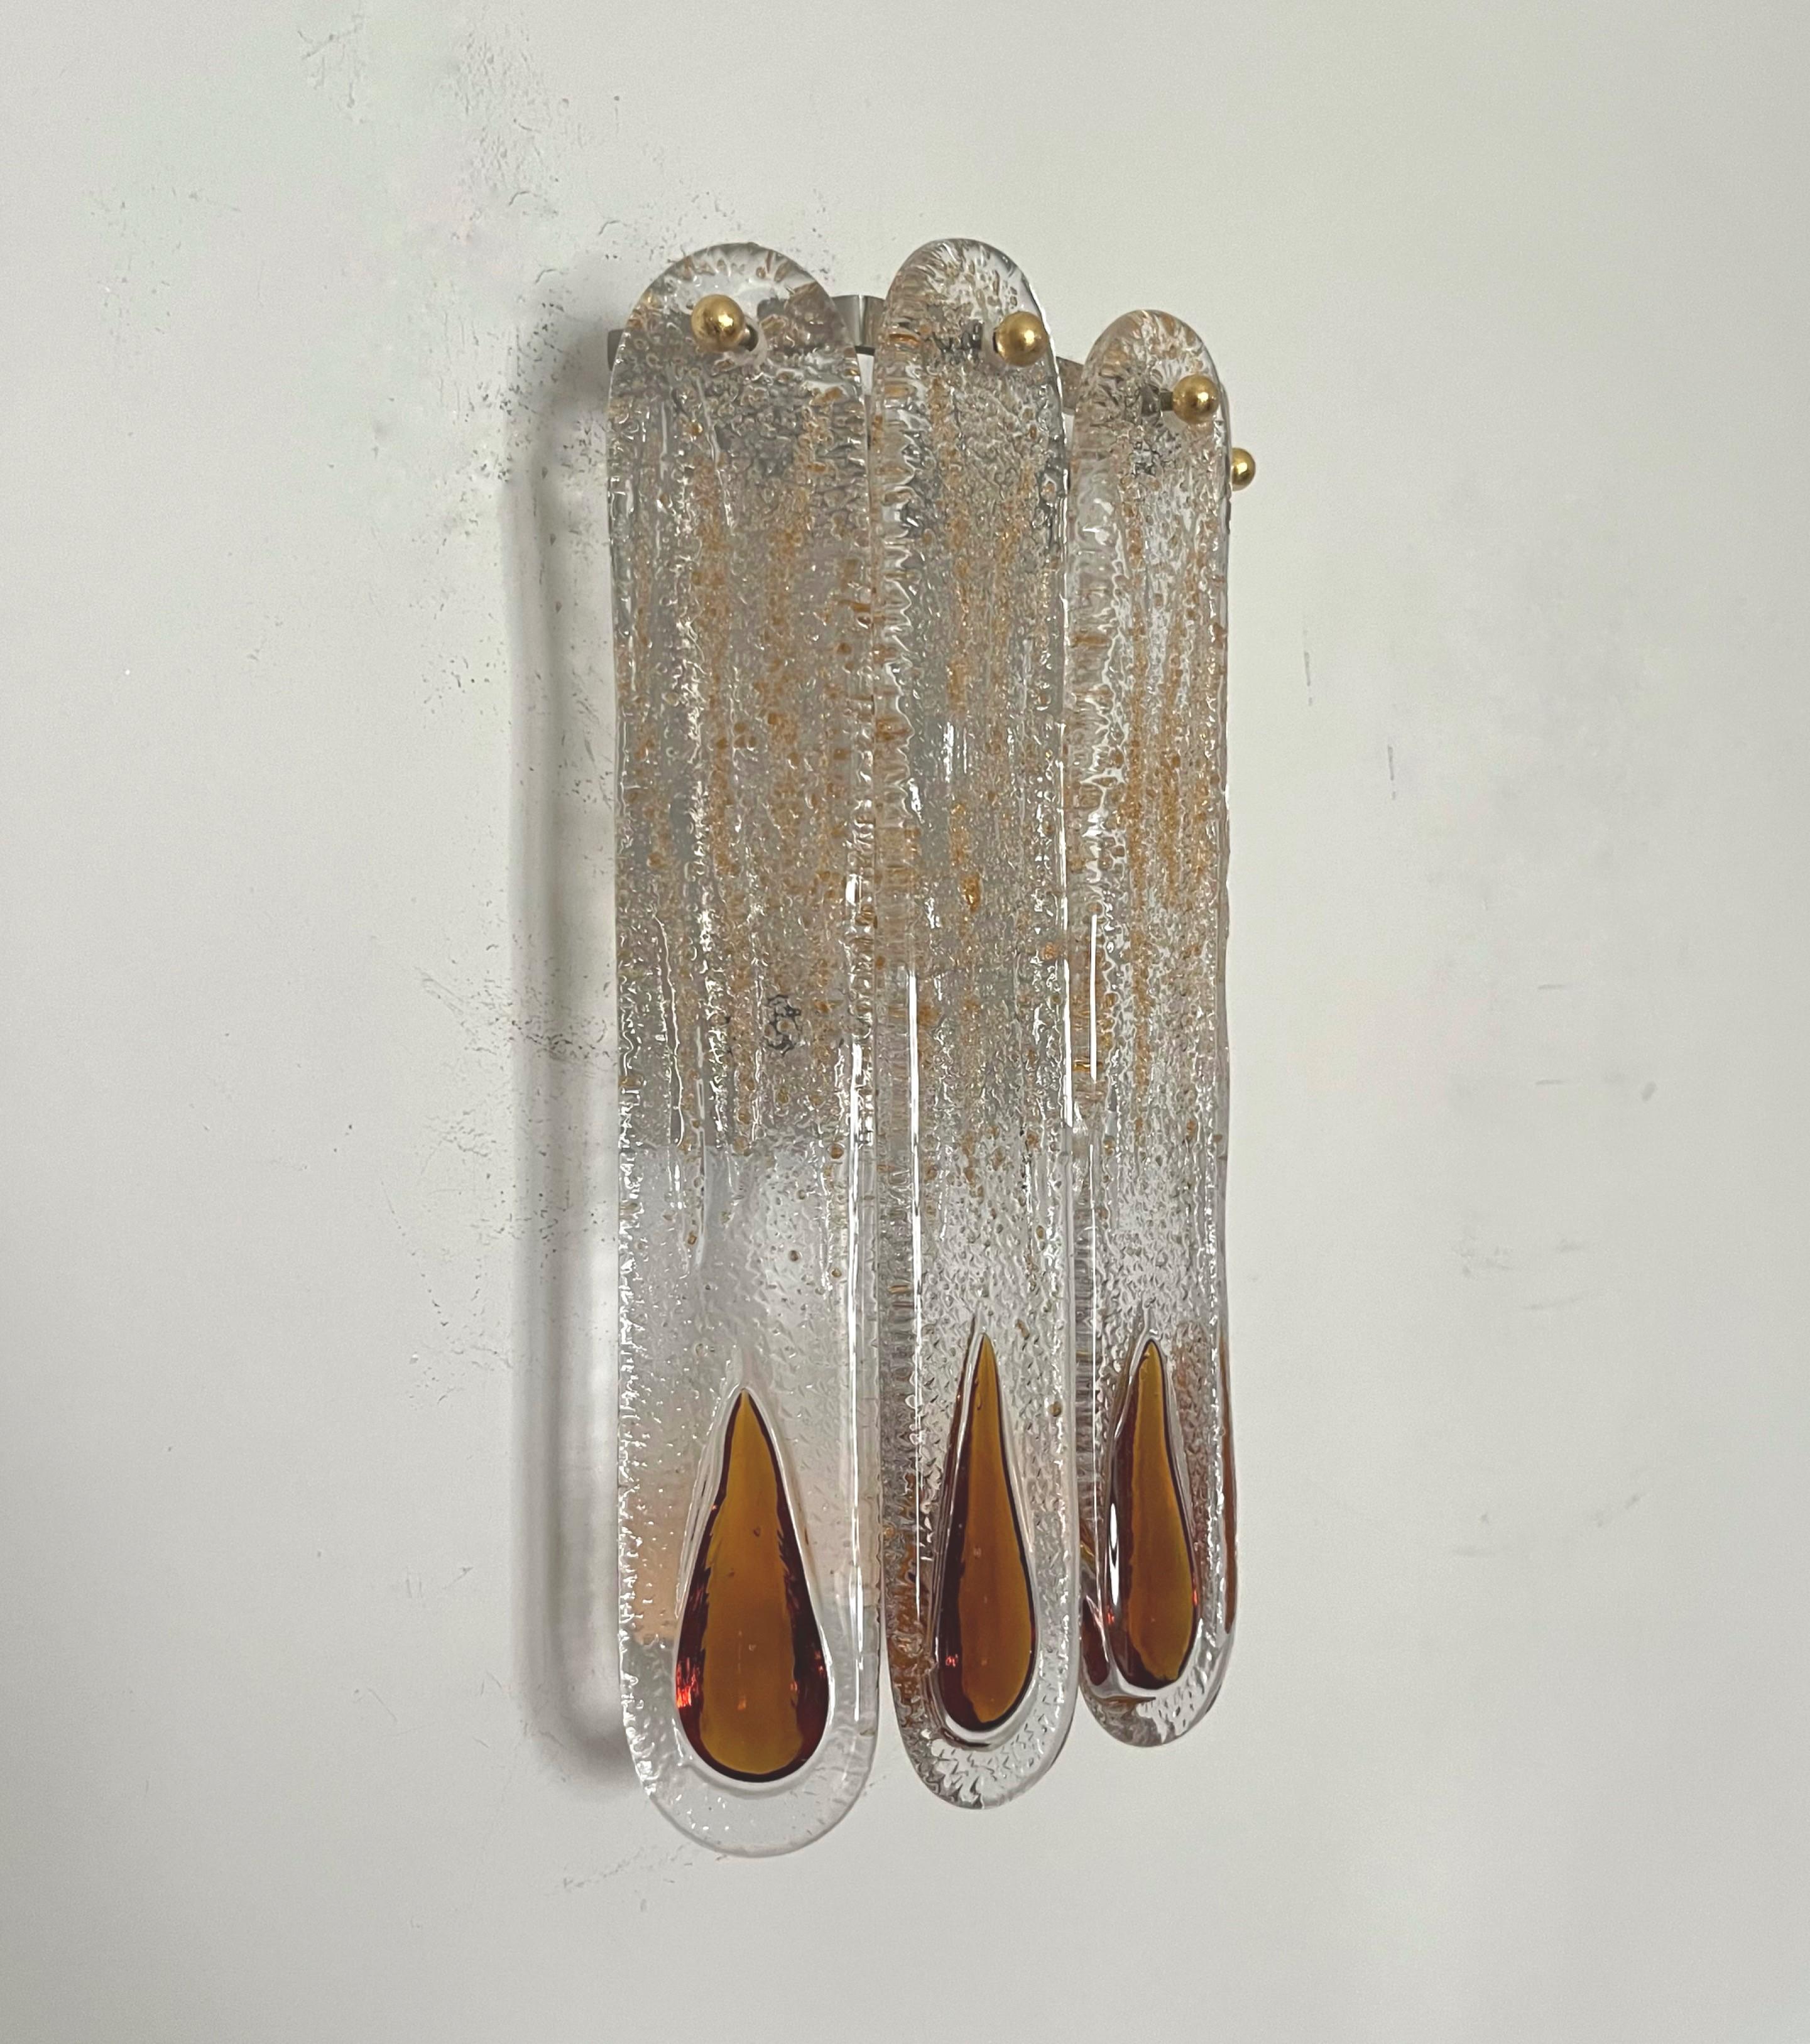 Unique and marvelous Set of Eight Italian Murano glass Wall Sconces from 1970s. These fixtures were designed and manufactured during the 1970s in Italy by Mazzega.
Mazzega lie in the noble Venetian glassworking tradition; the firm was founded Angelo